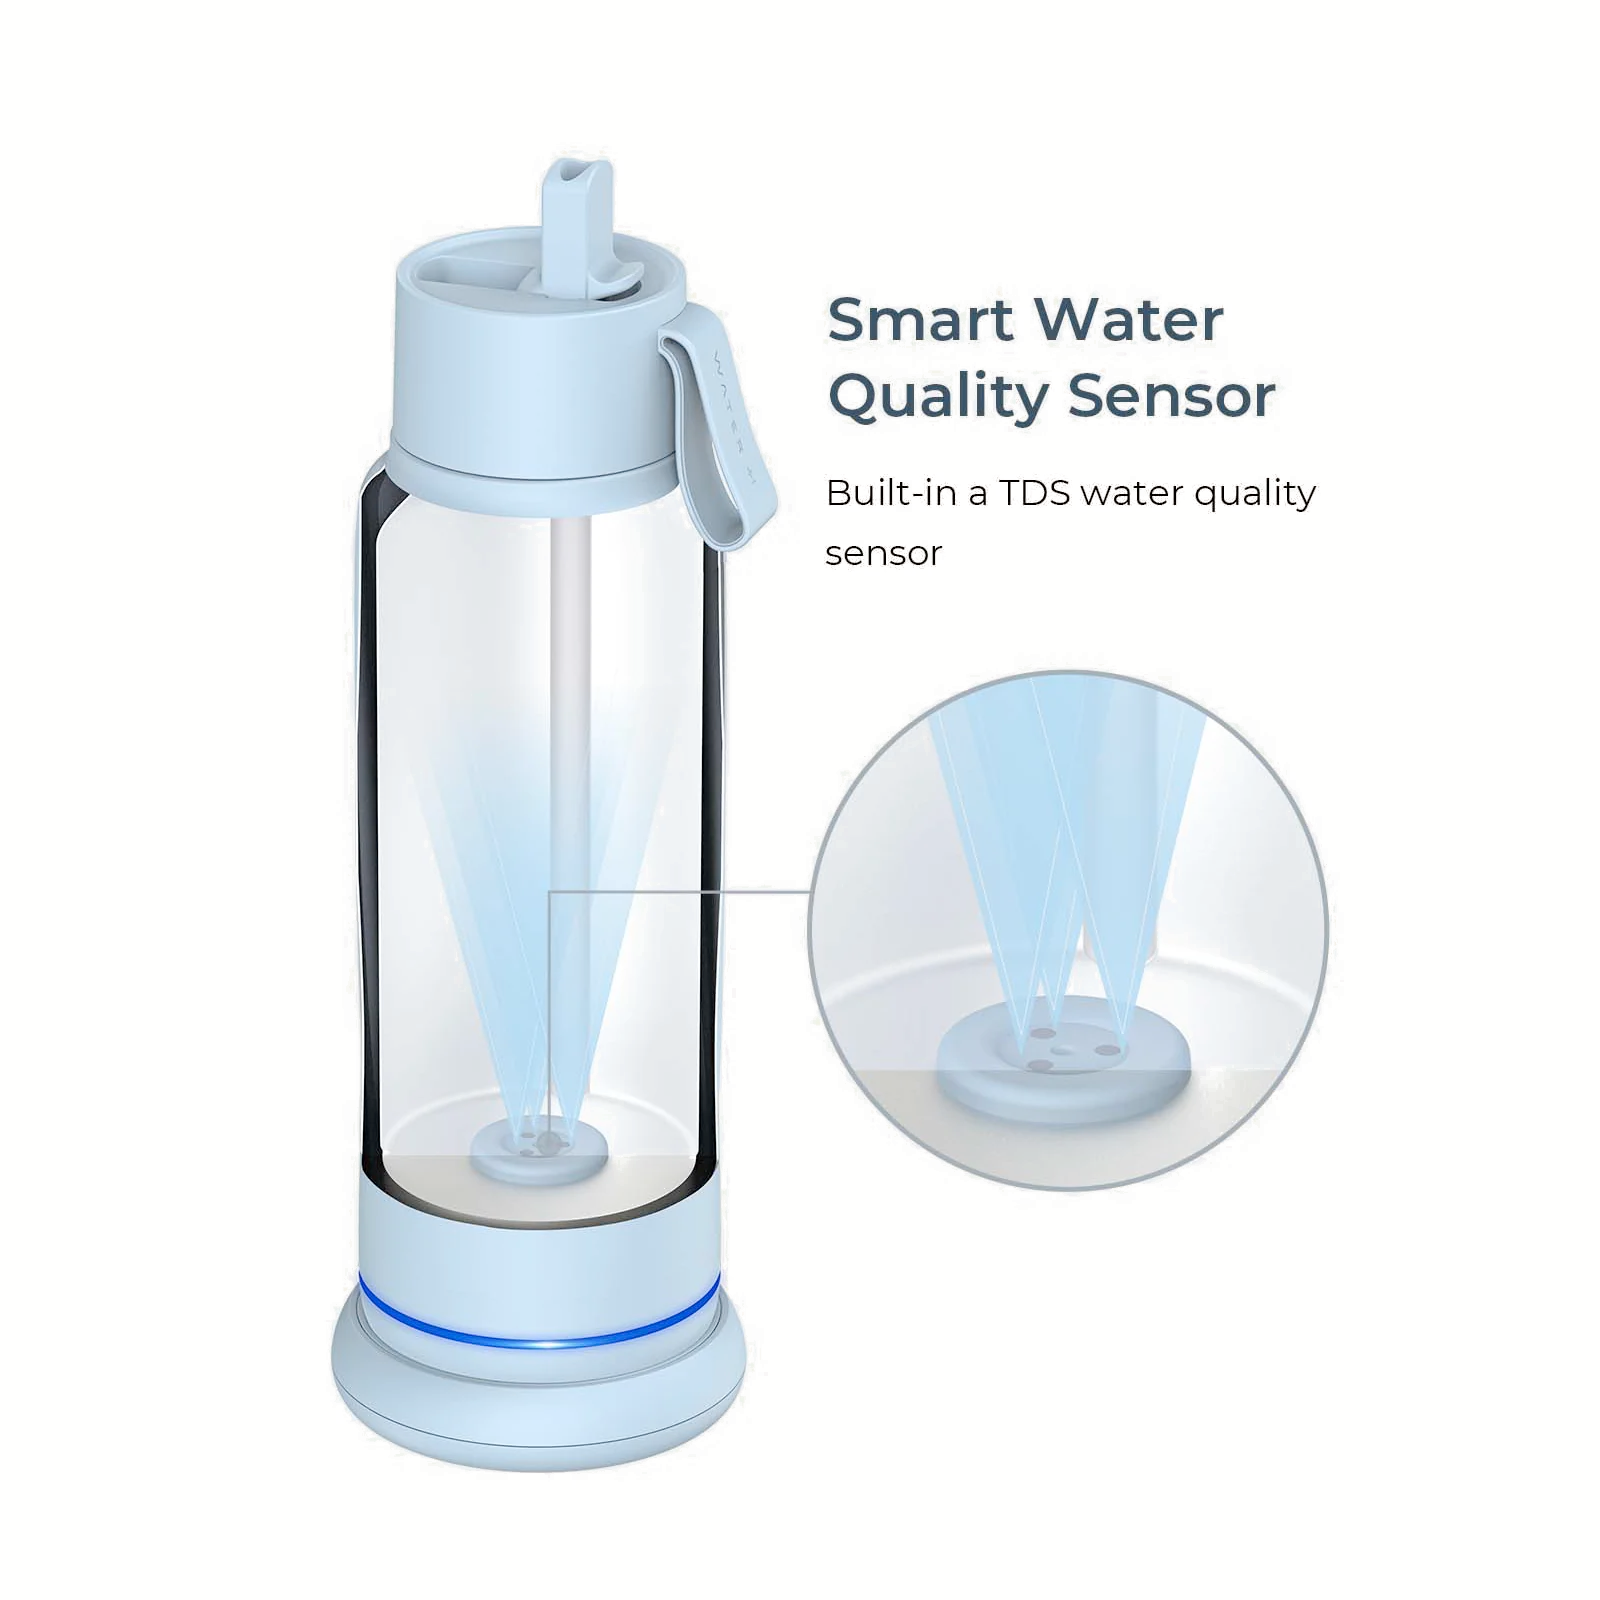 The Smart water bottle that reminds you to drink water with LED